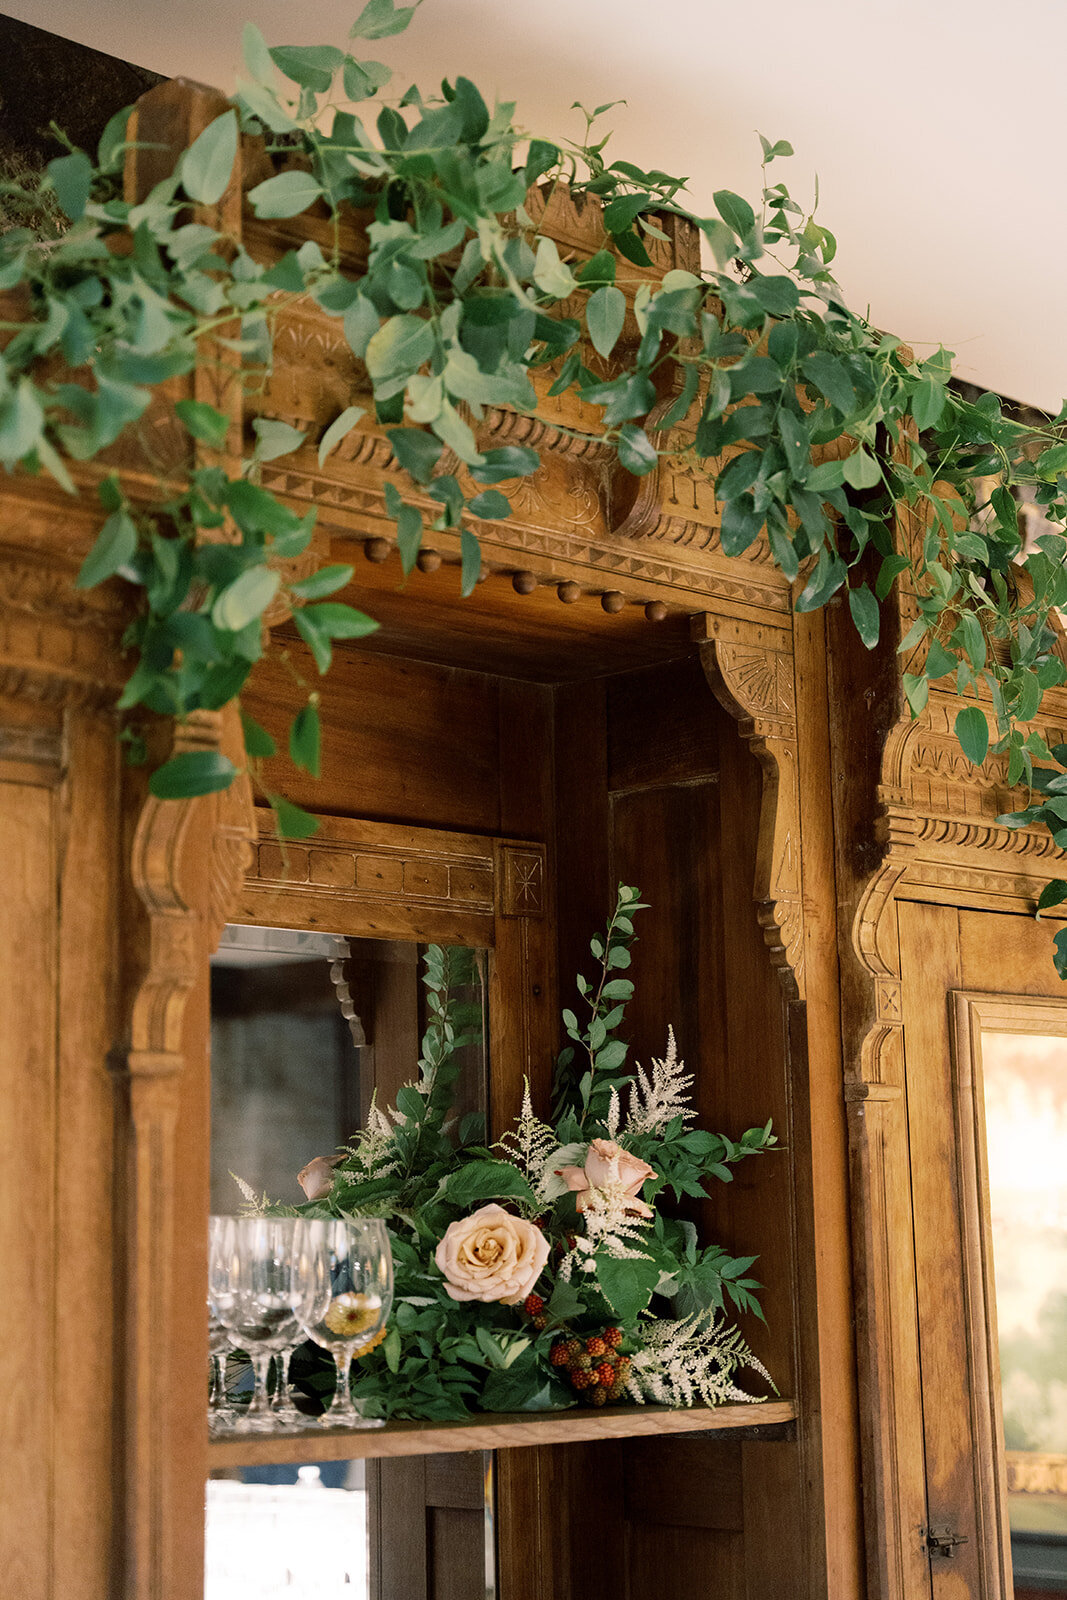 Antique wooden shelf with floral arrangement tucked in it and smilax greenery vining along the molding.